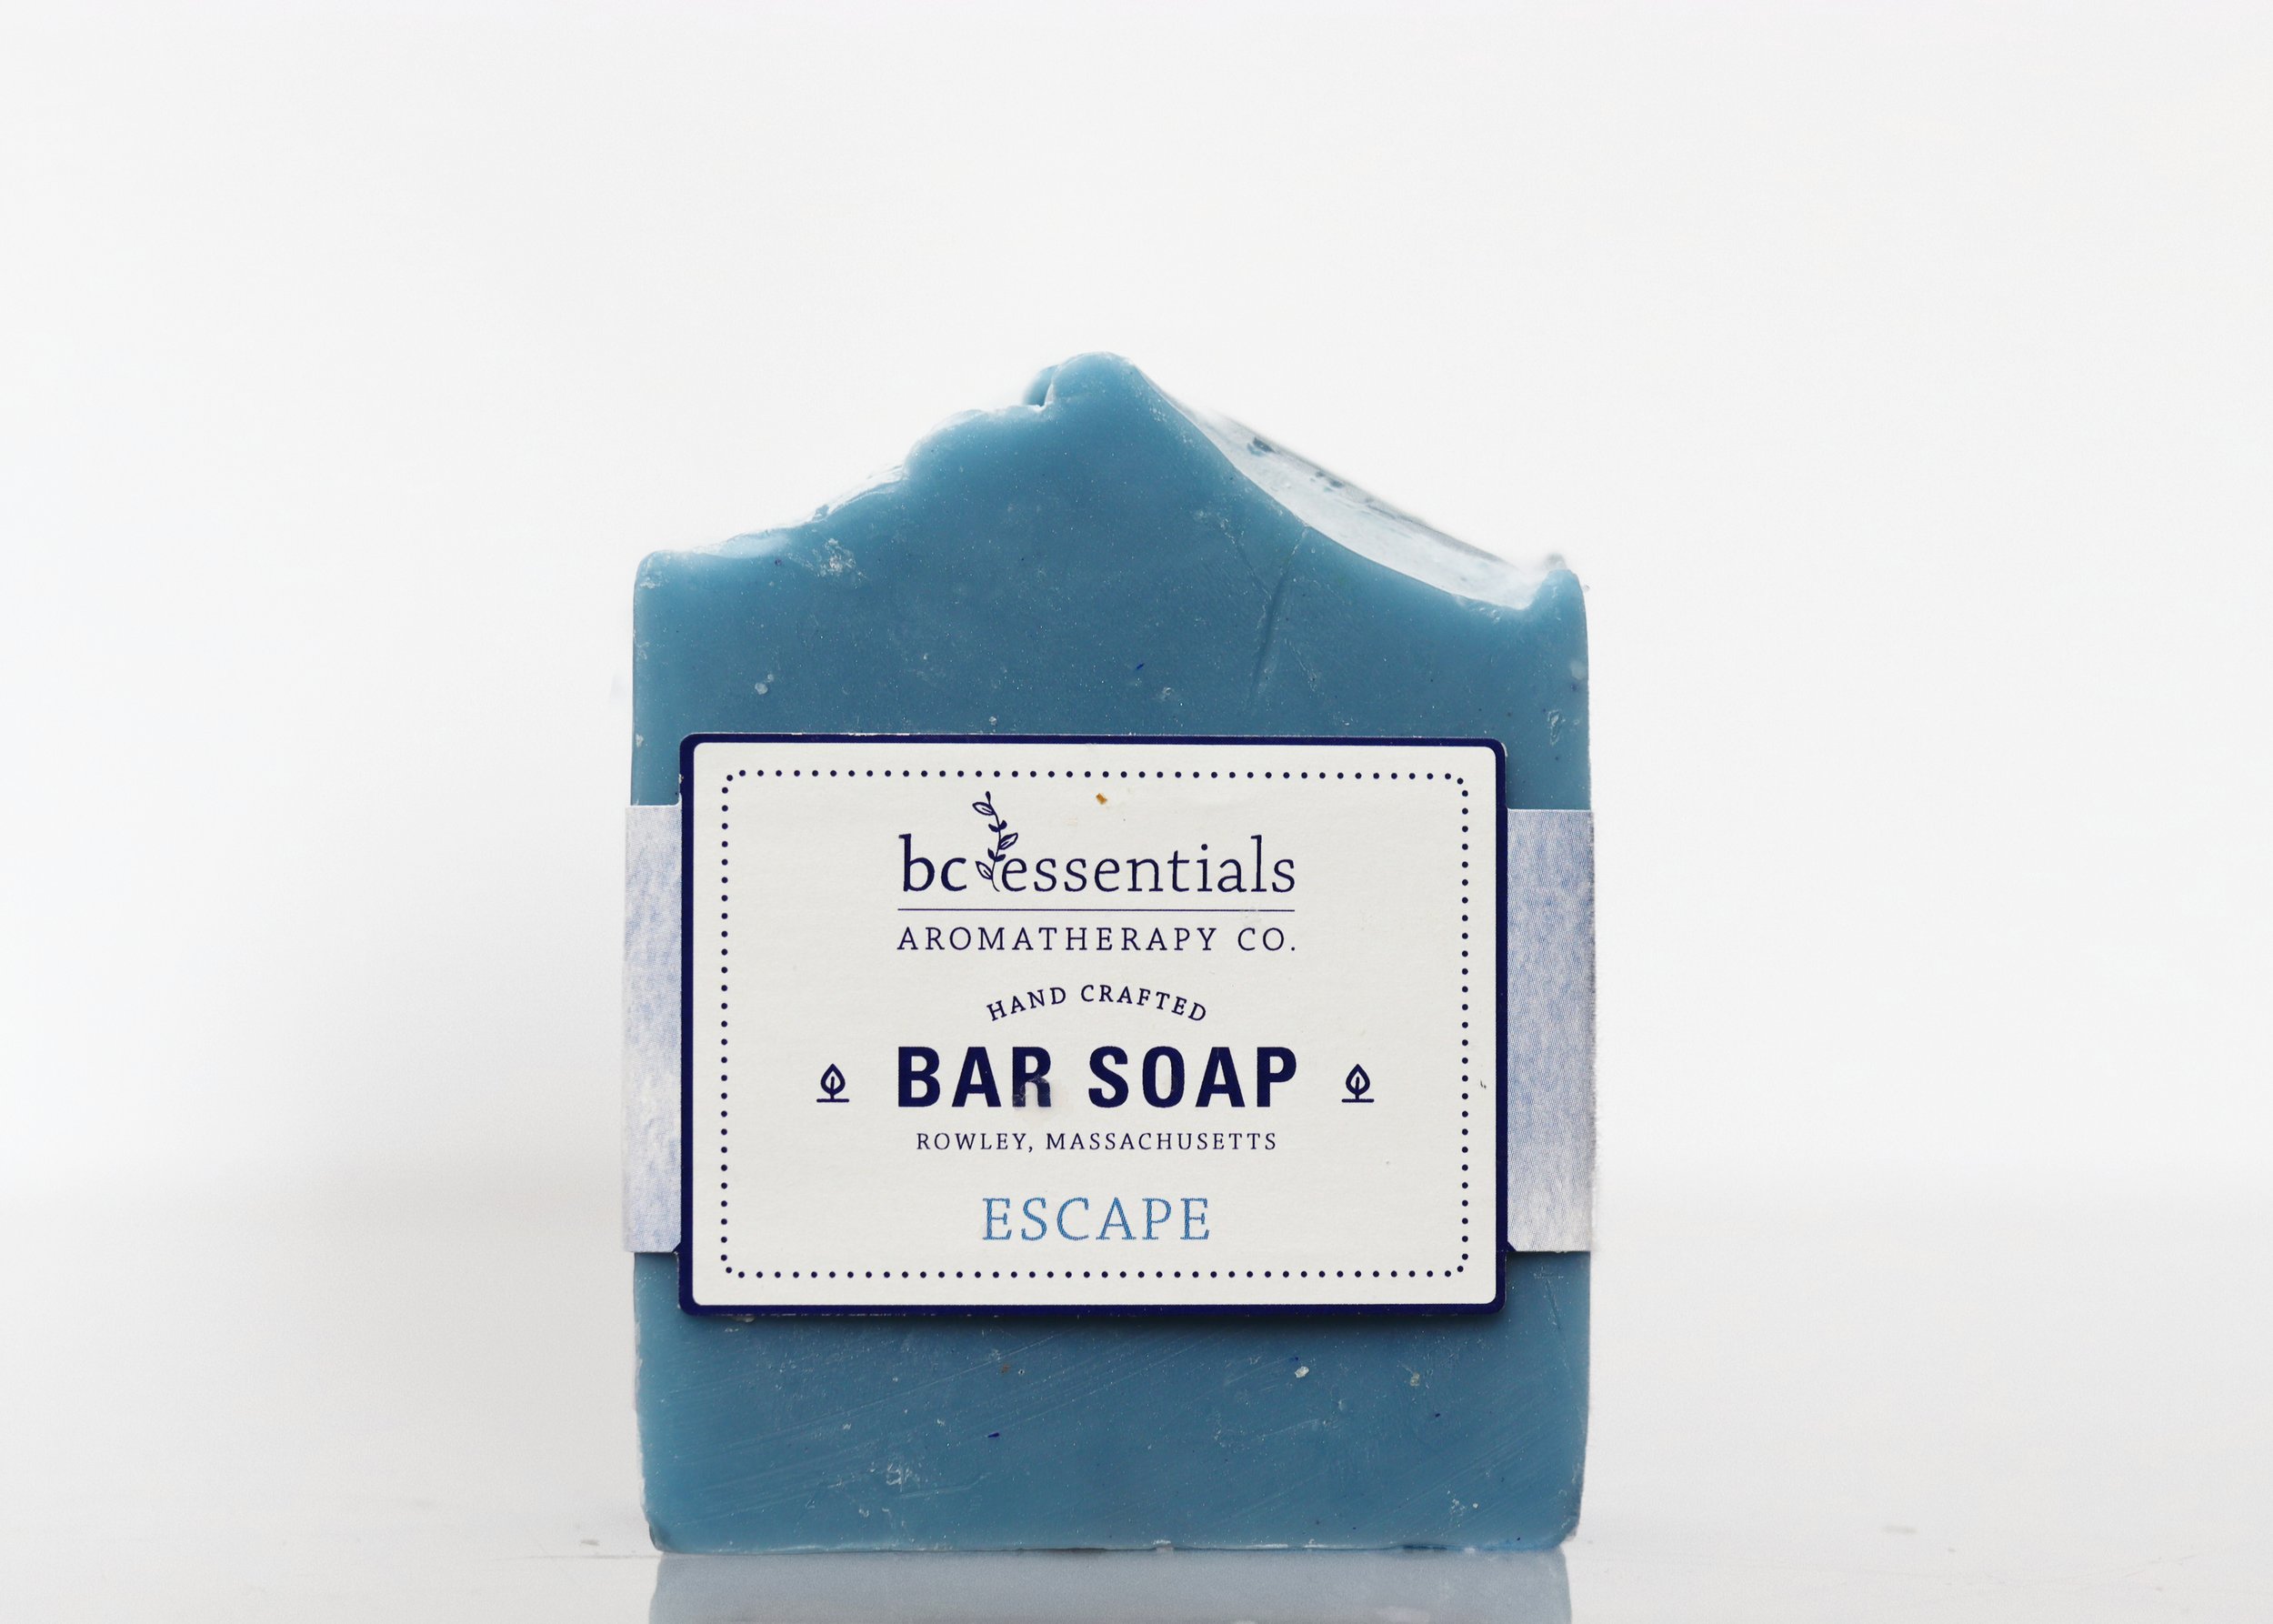 Back Porch Soap Company: Top Five Essential Oils for Soap Making